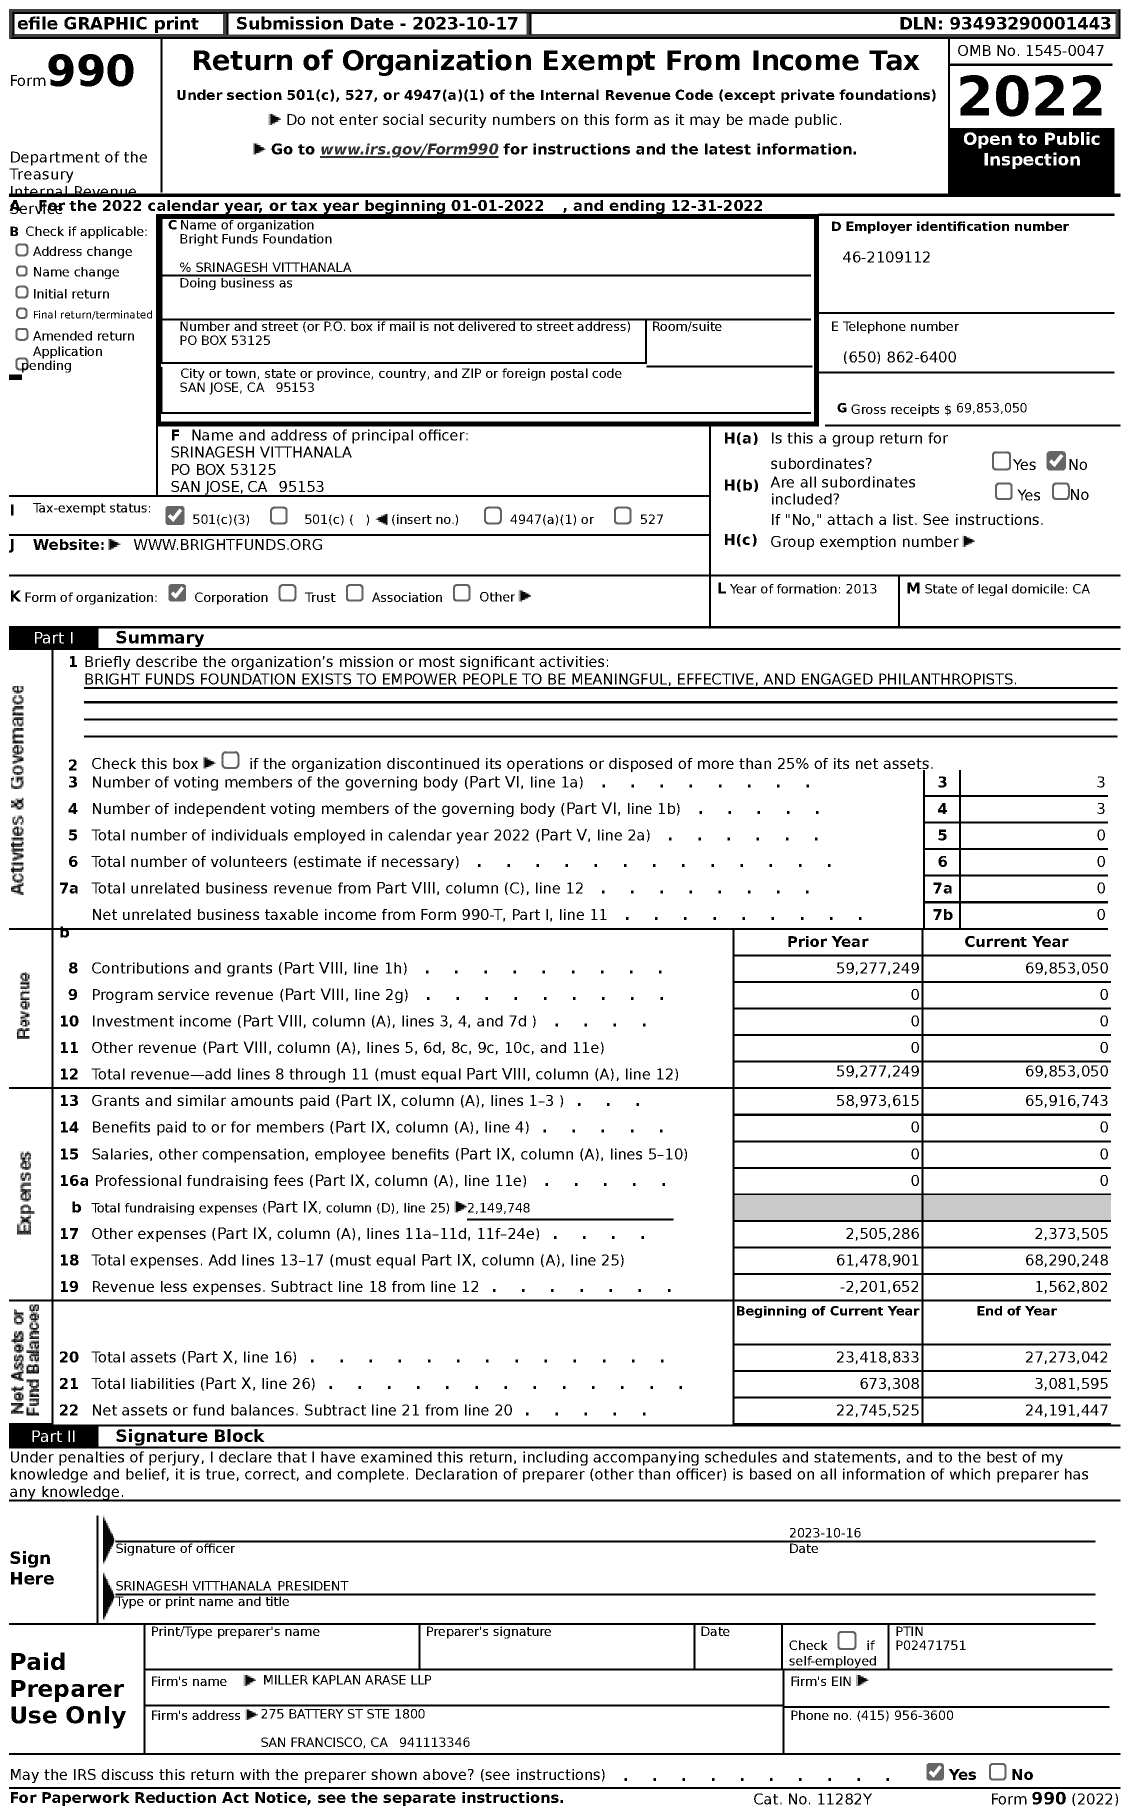 Image of first page of 2022 Form 990 for Bright Funds Foundation